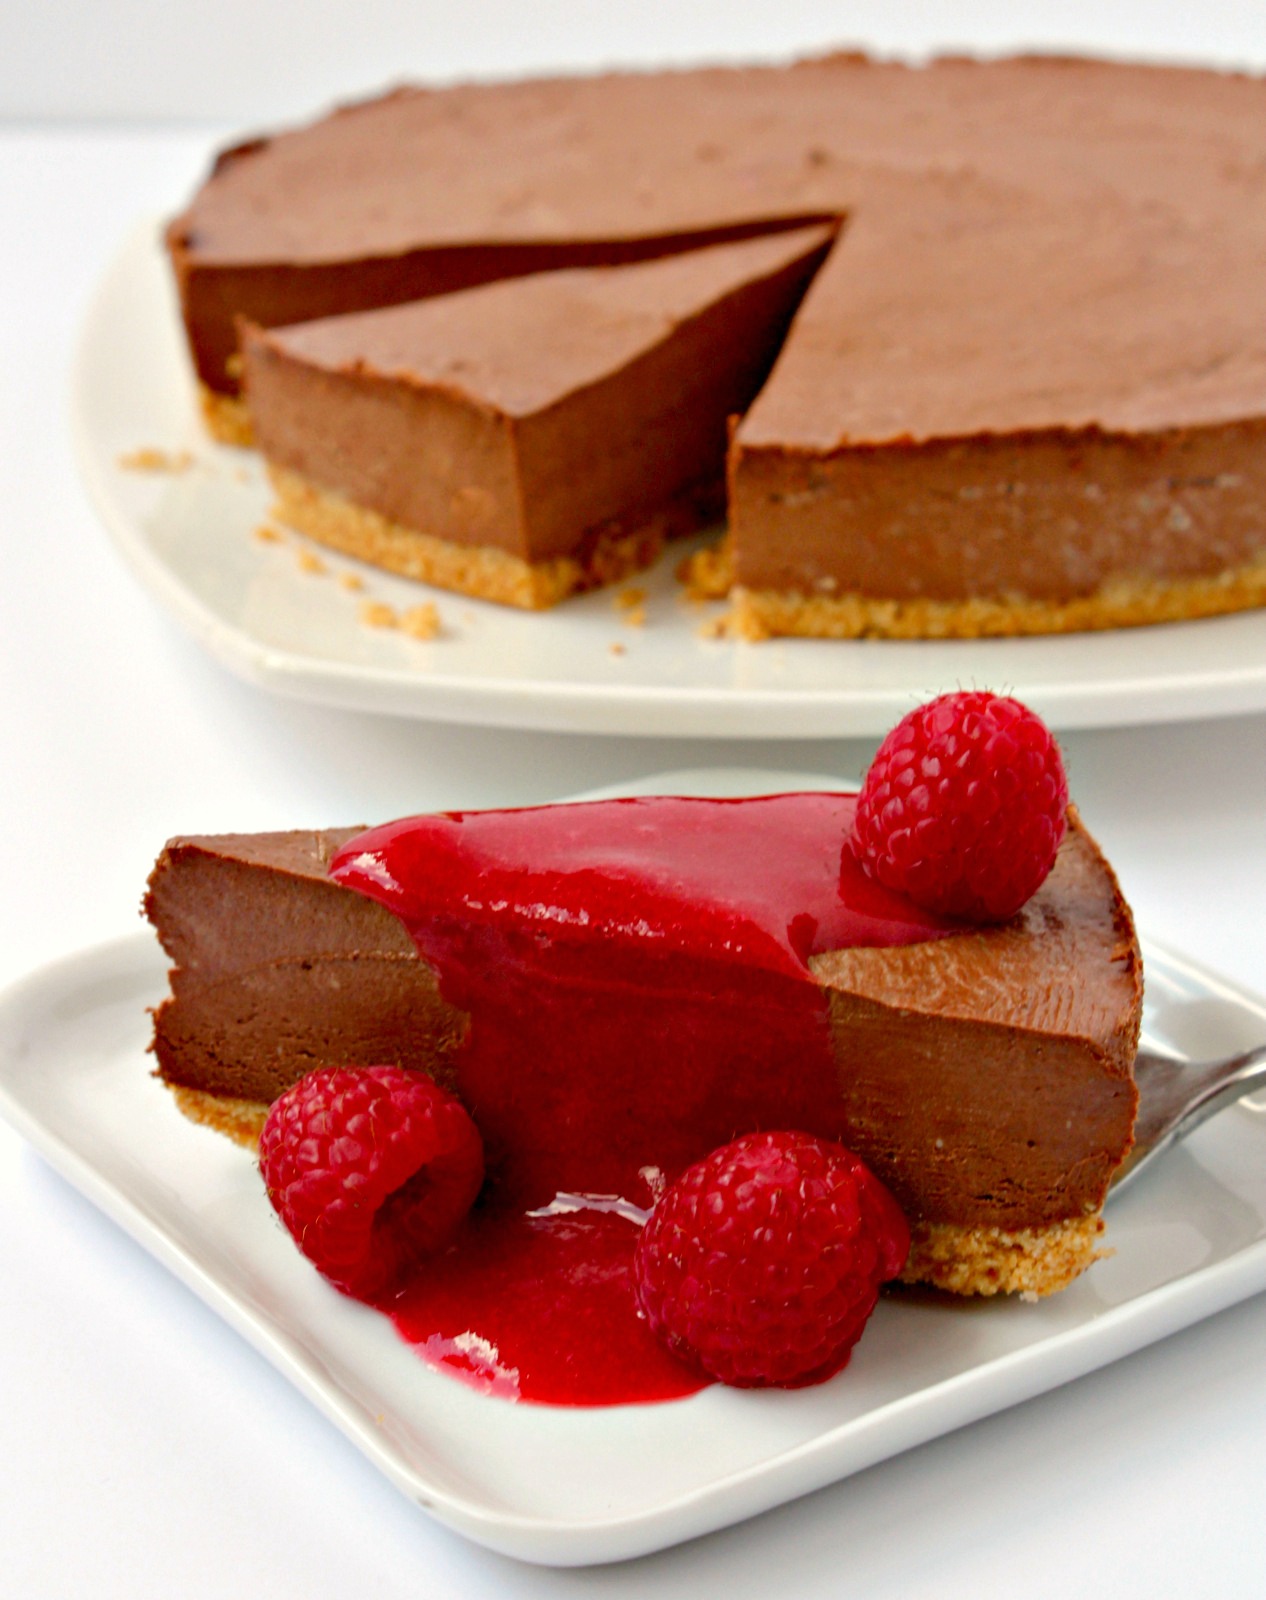 Use dark, milk or white chocolate to make this luscious Chocolate Cheesecake! Just 30 minutes to make and best of all no baking involved. The ultimate dessert for any chocolate lover! #chocolate #cheesecake #nobake #dessert #chocolatecheesecake